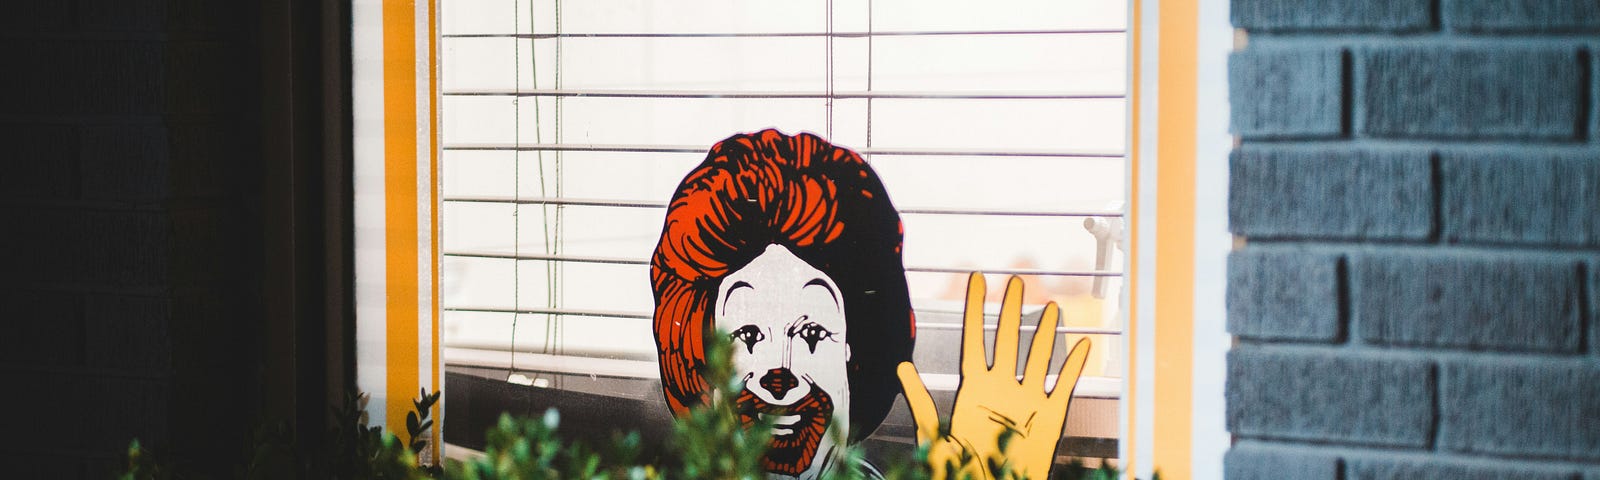 A cutout of Ronald McDonald peers out from against the wall of a house, behind a bush.